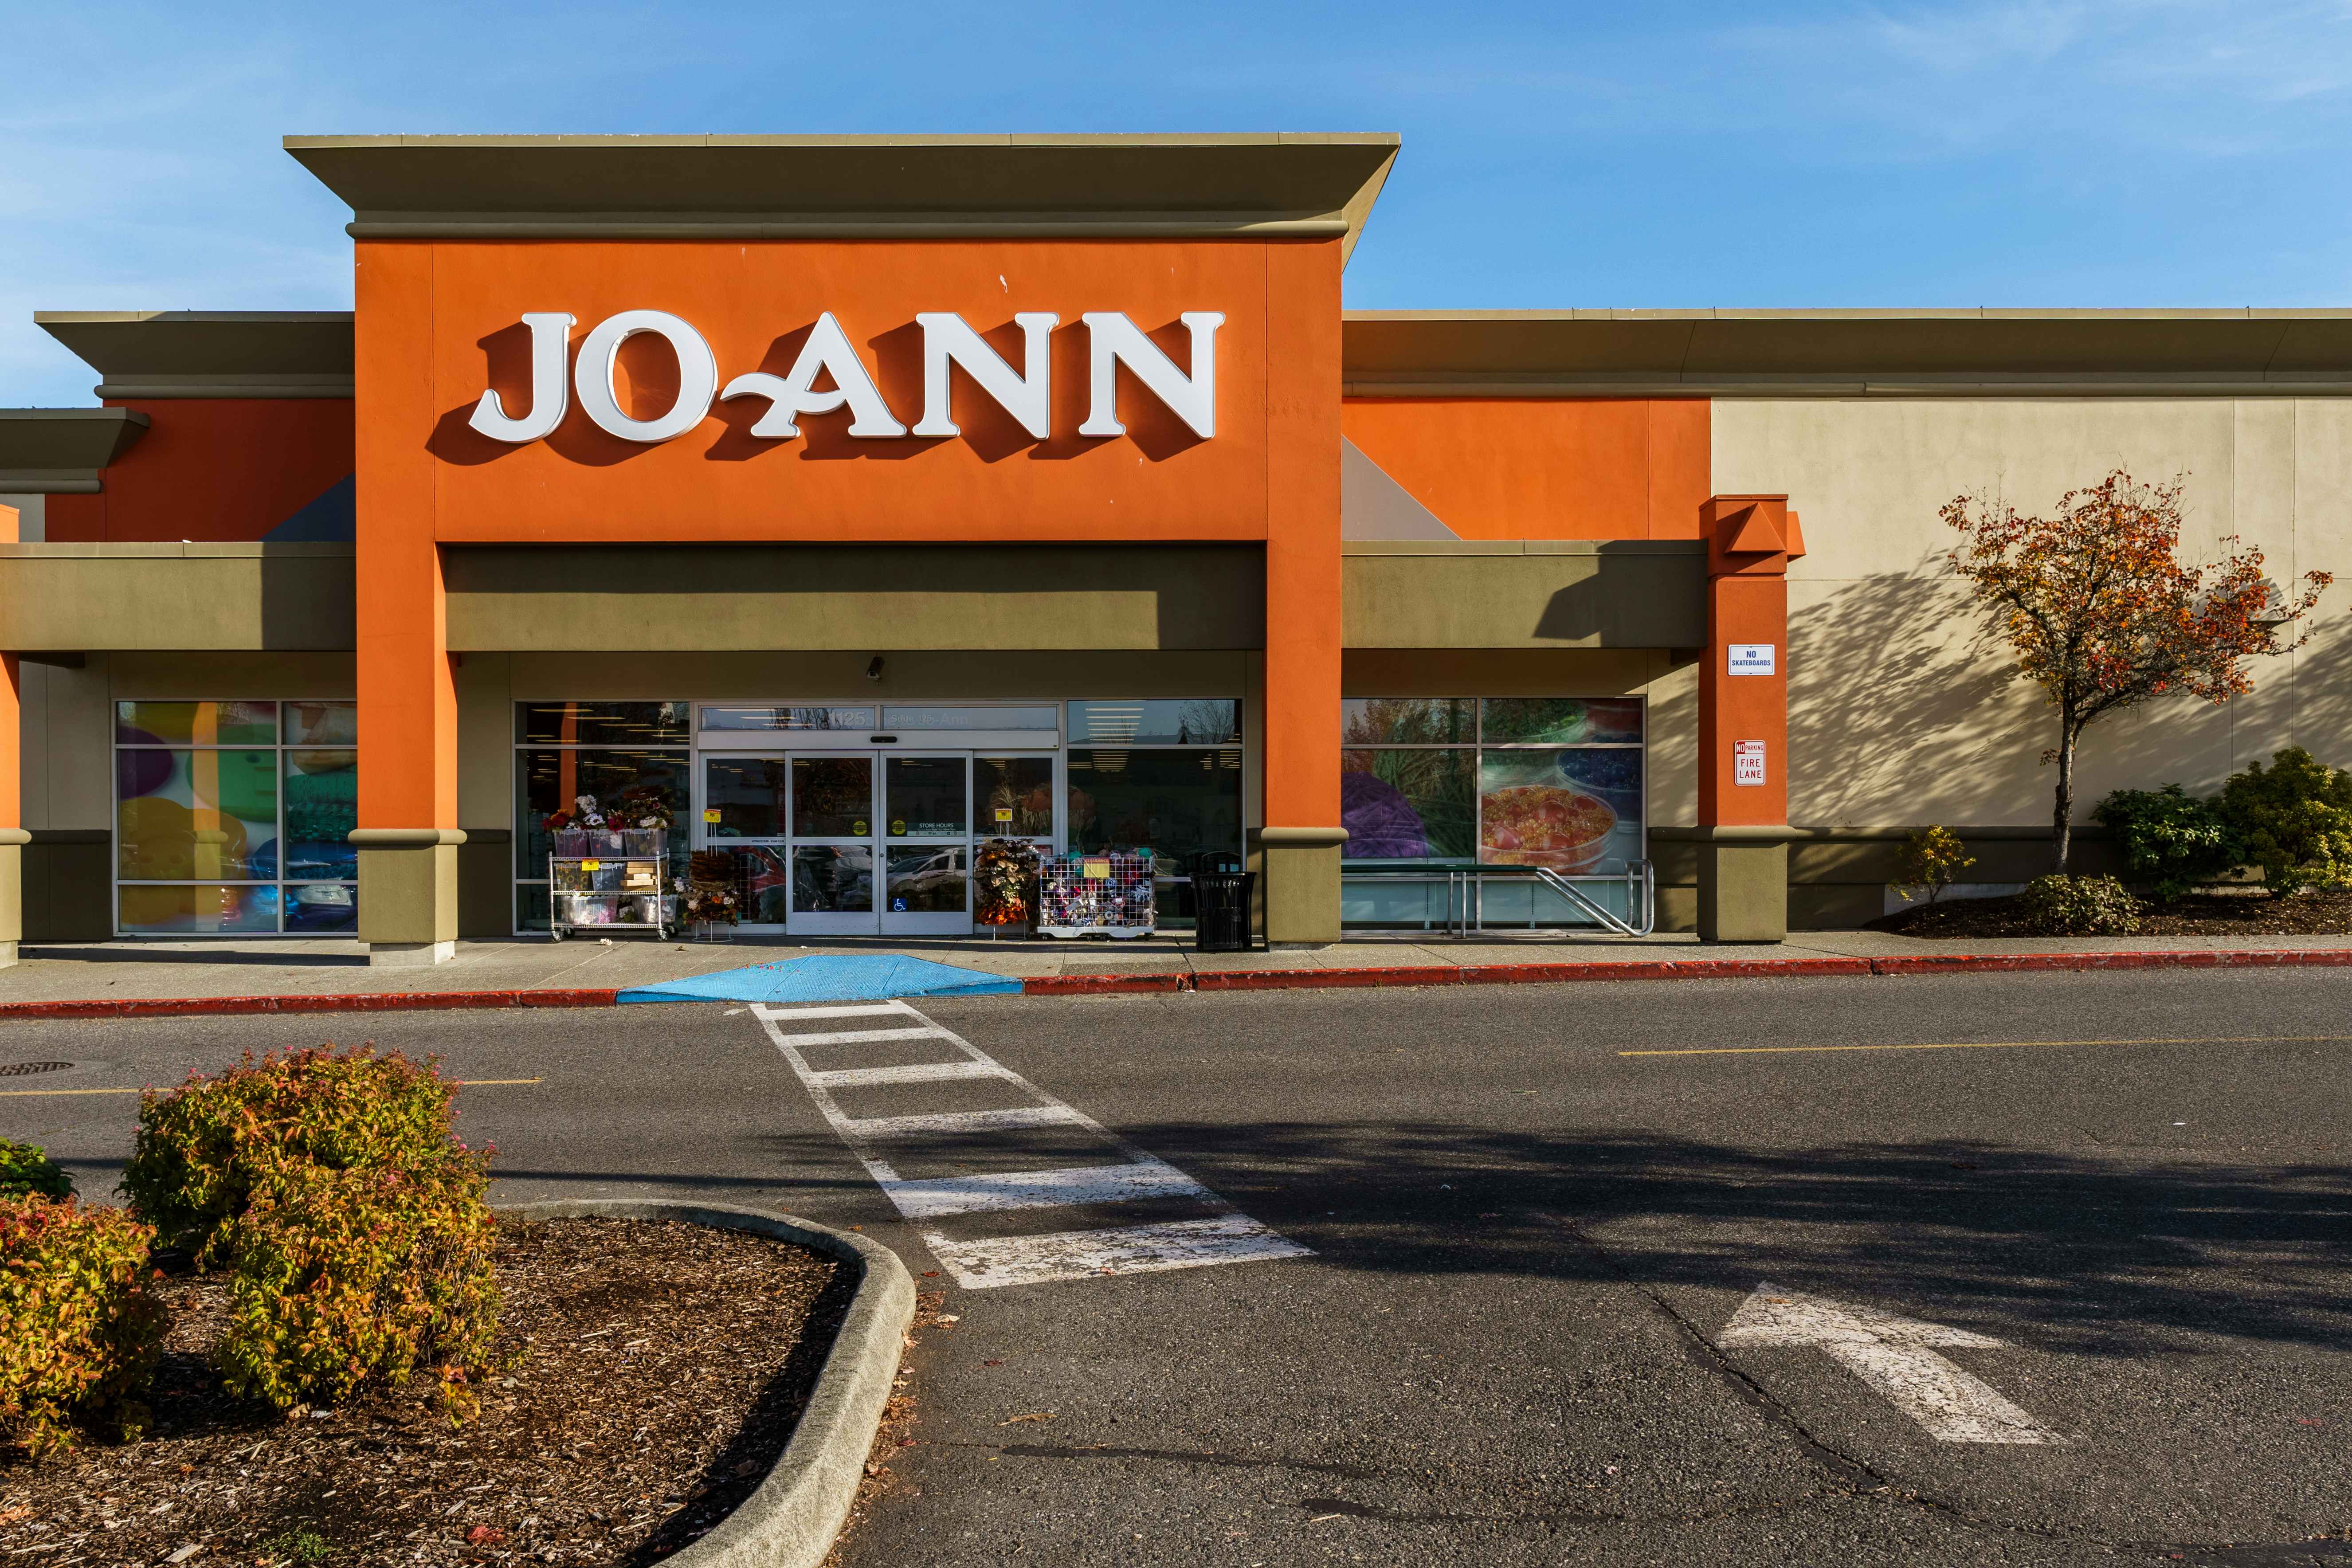 JOANN craft storefront and parking lot.